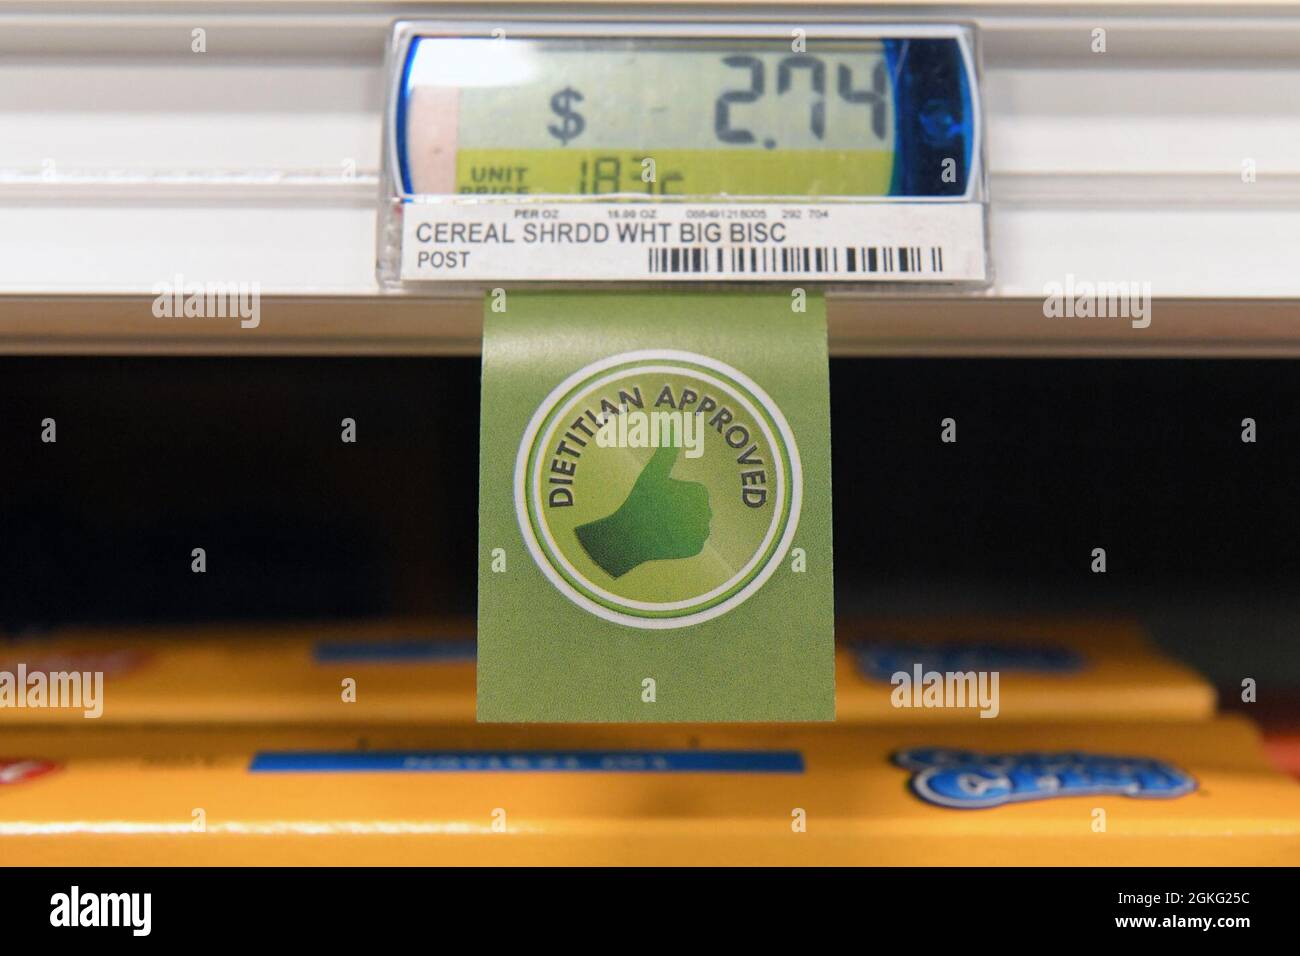 A Green Thumb nutrition identification card has been placed on the shelves in the base commissary at Robins Air Force Base, Georgia, April 13, 2021. The dietitian-approved thumb initiative aims to make locating healthy nutritionally-dense foods easy for shoppers to find so that they can make healthier food choices. Stock Photo